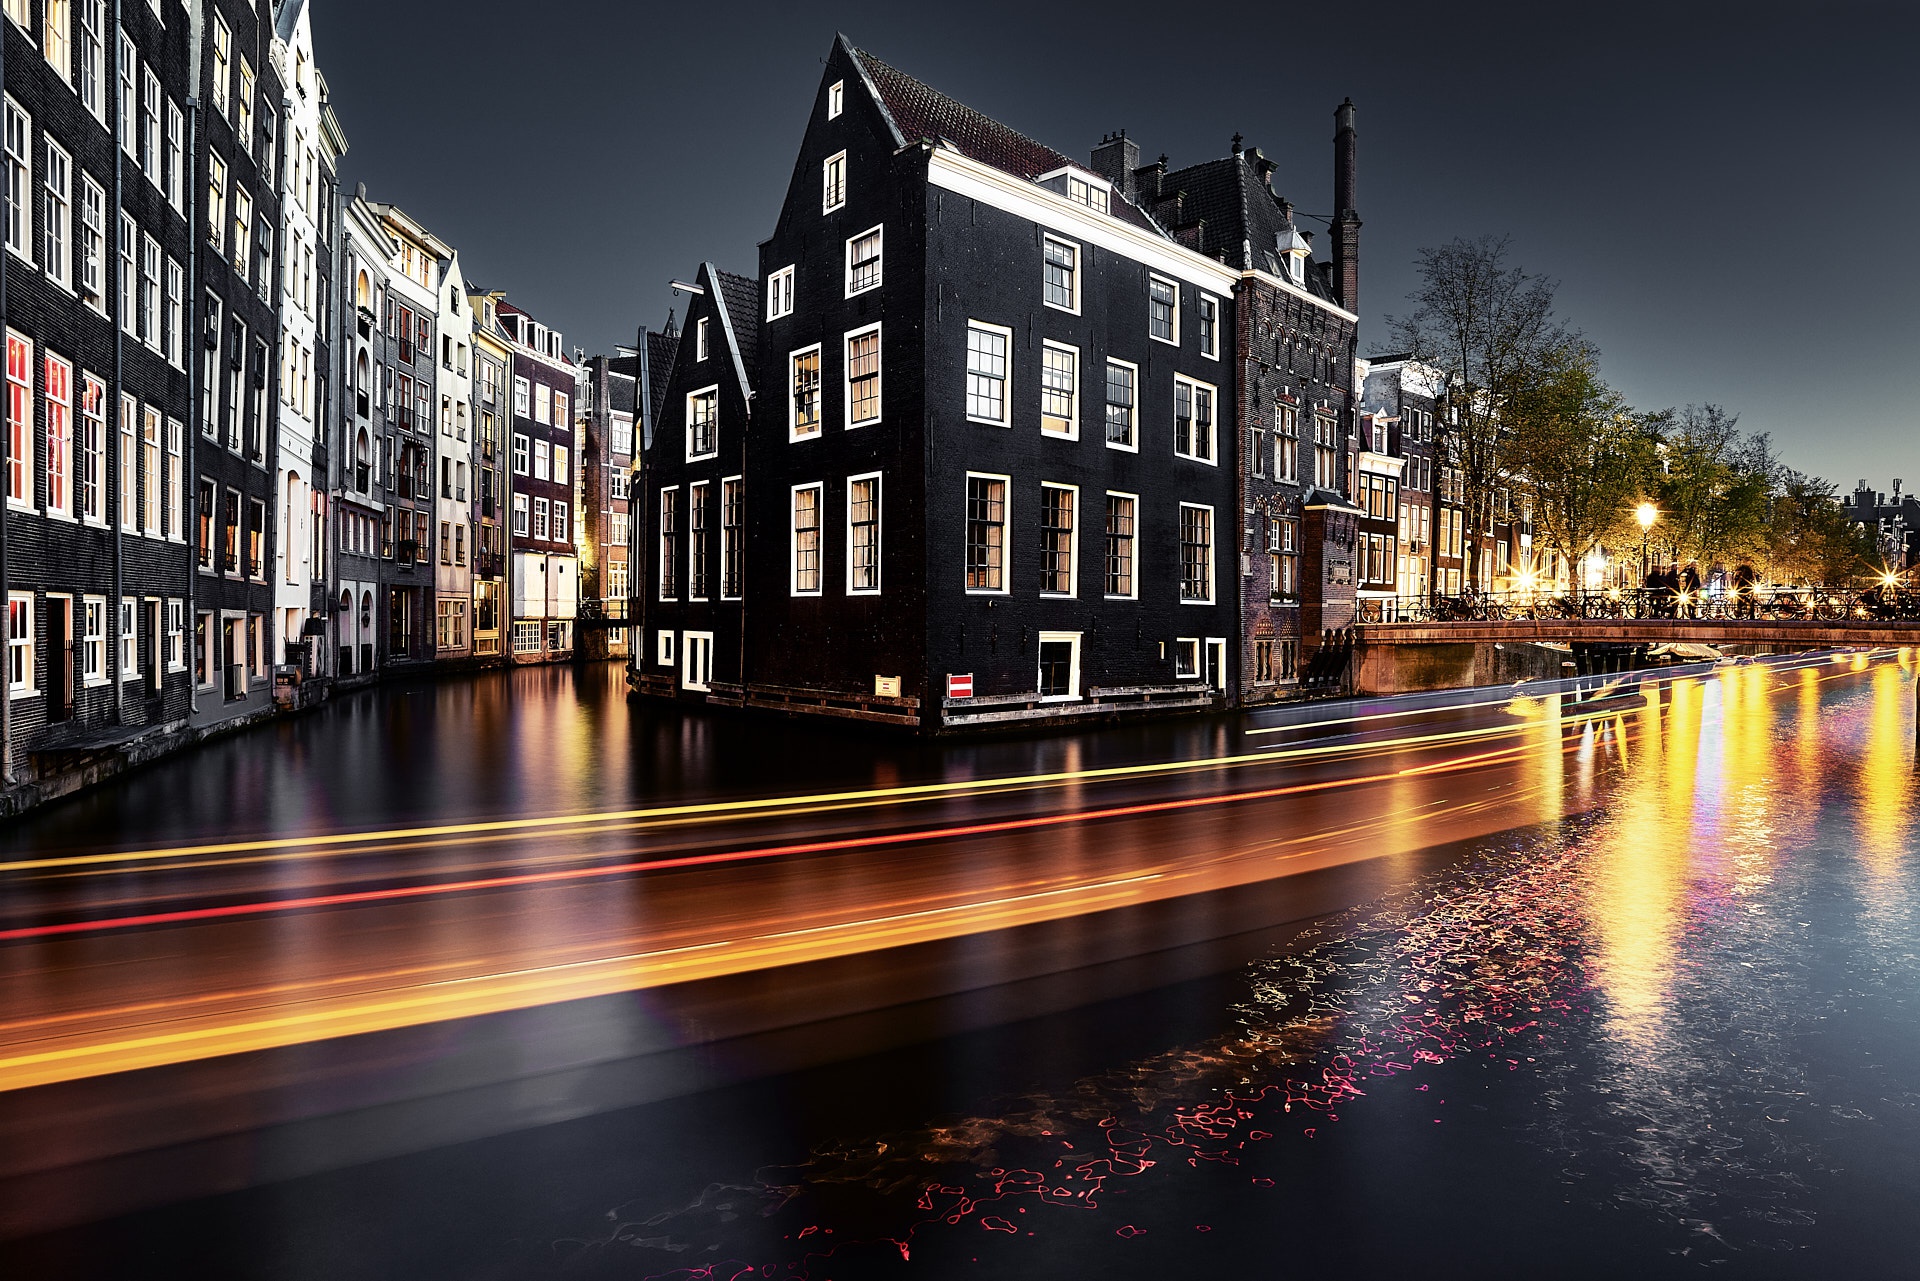 City Night Time Lapse Building House Canal Netherlands 1920x1281